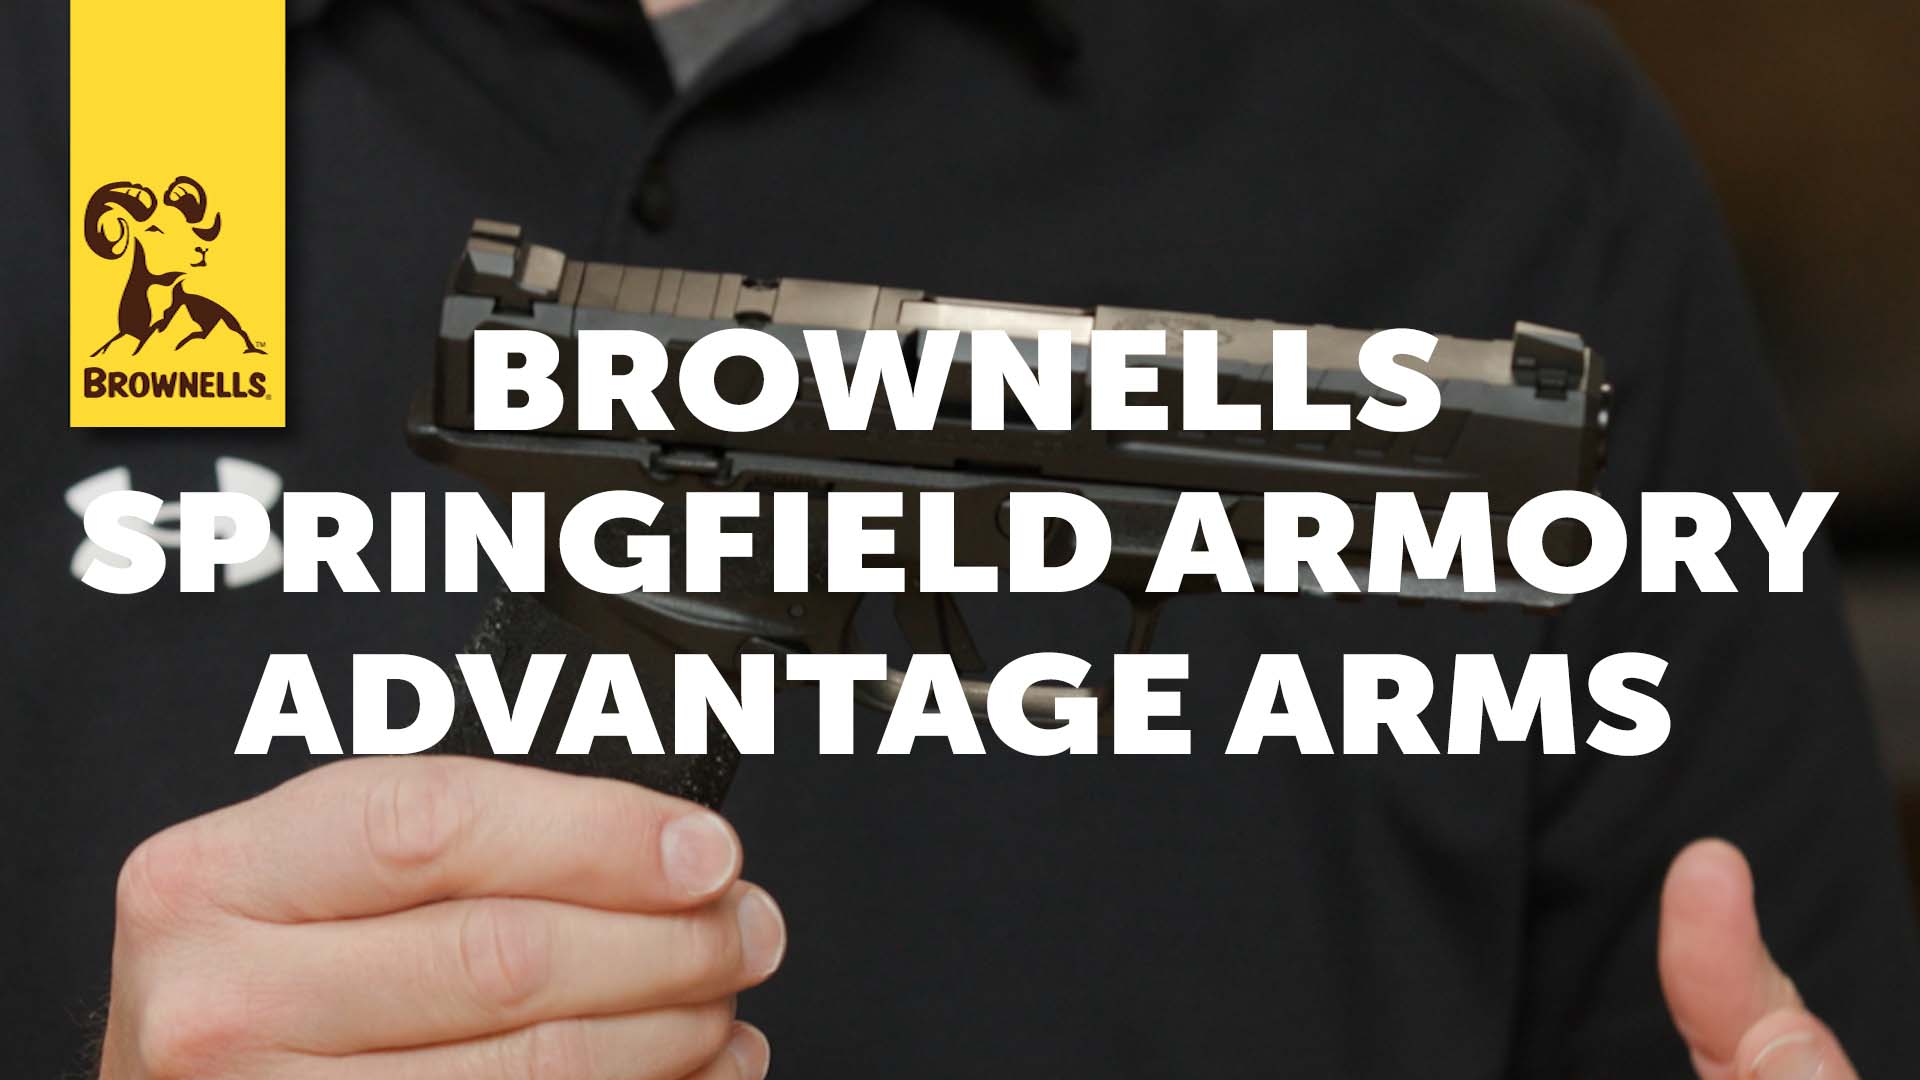 New Products: Springfield Armory, Advantage Arms & Brownells